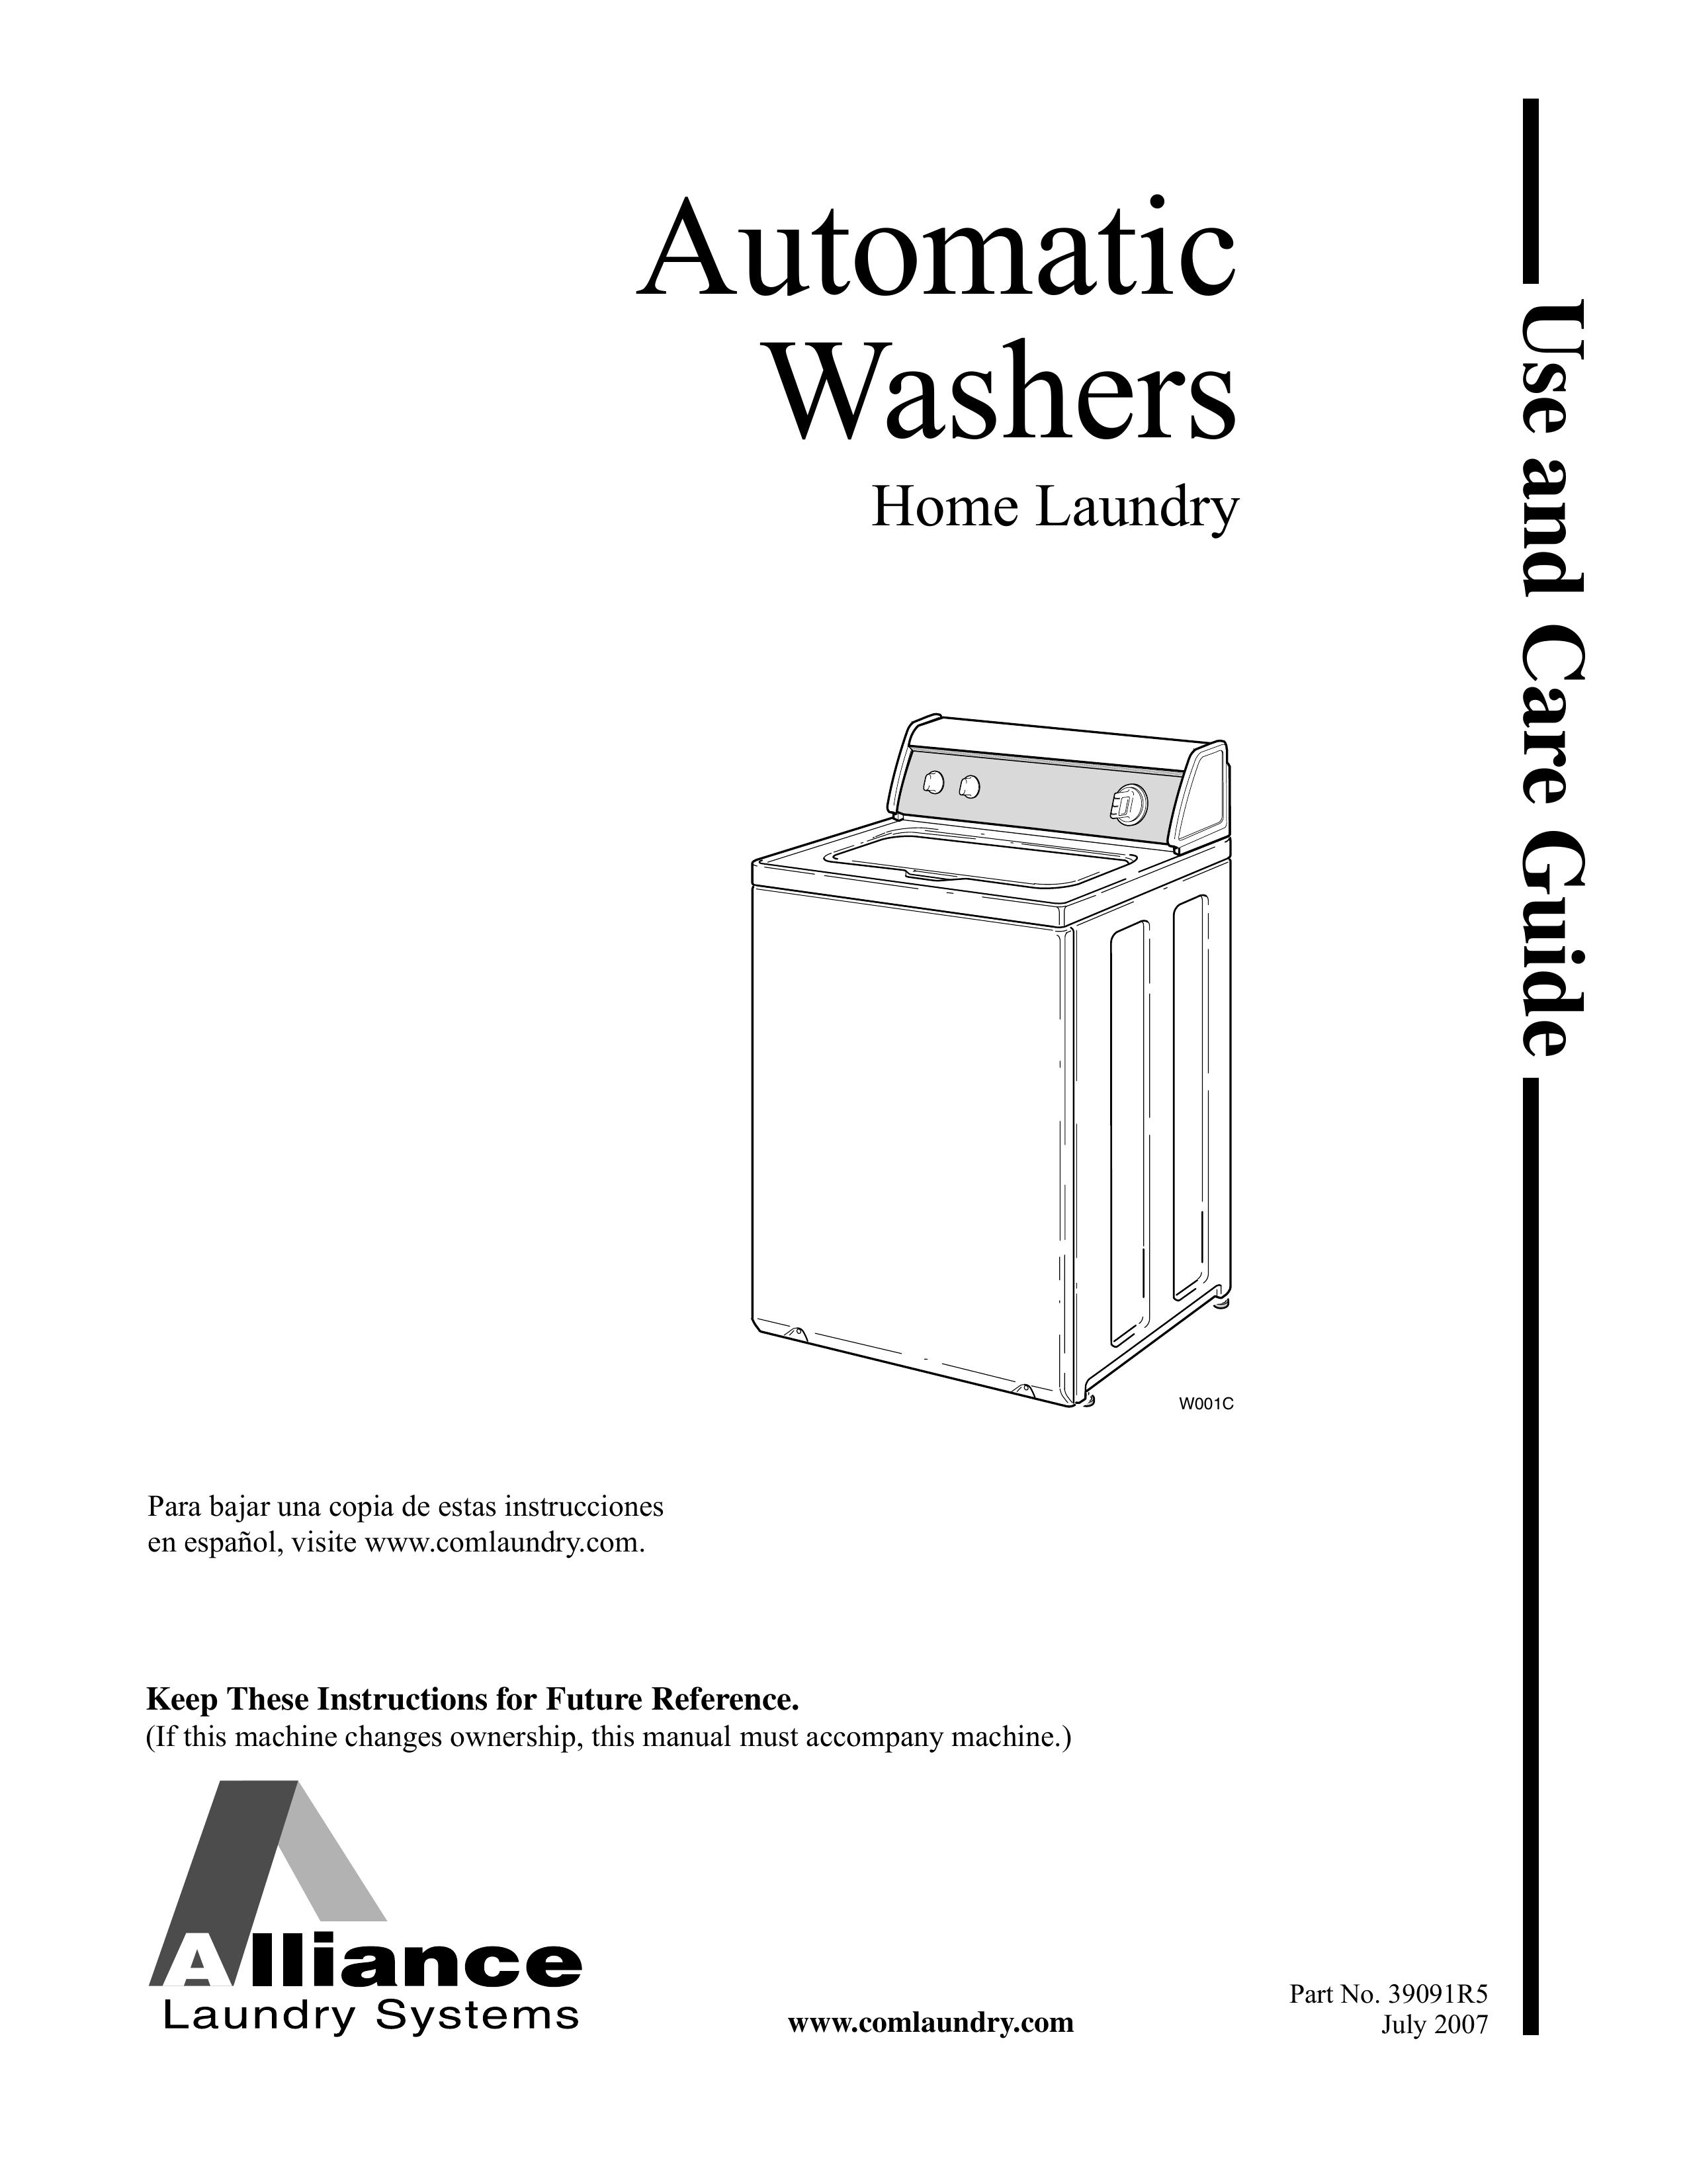 Alliance Laundry Systems LWS01N Washer/Dryer User Manual (Page 1)